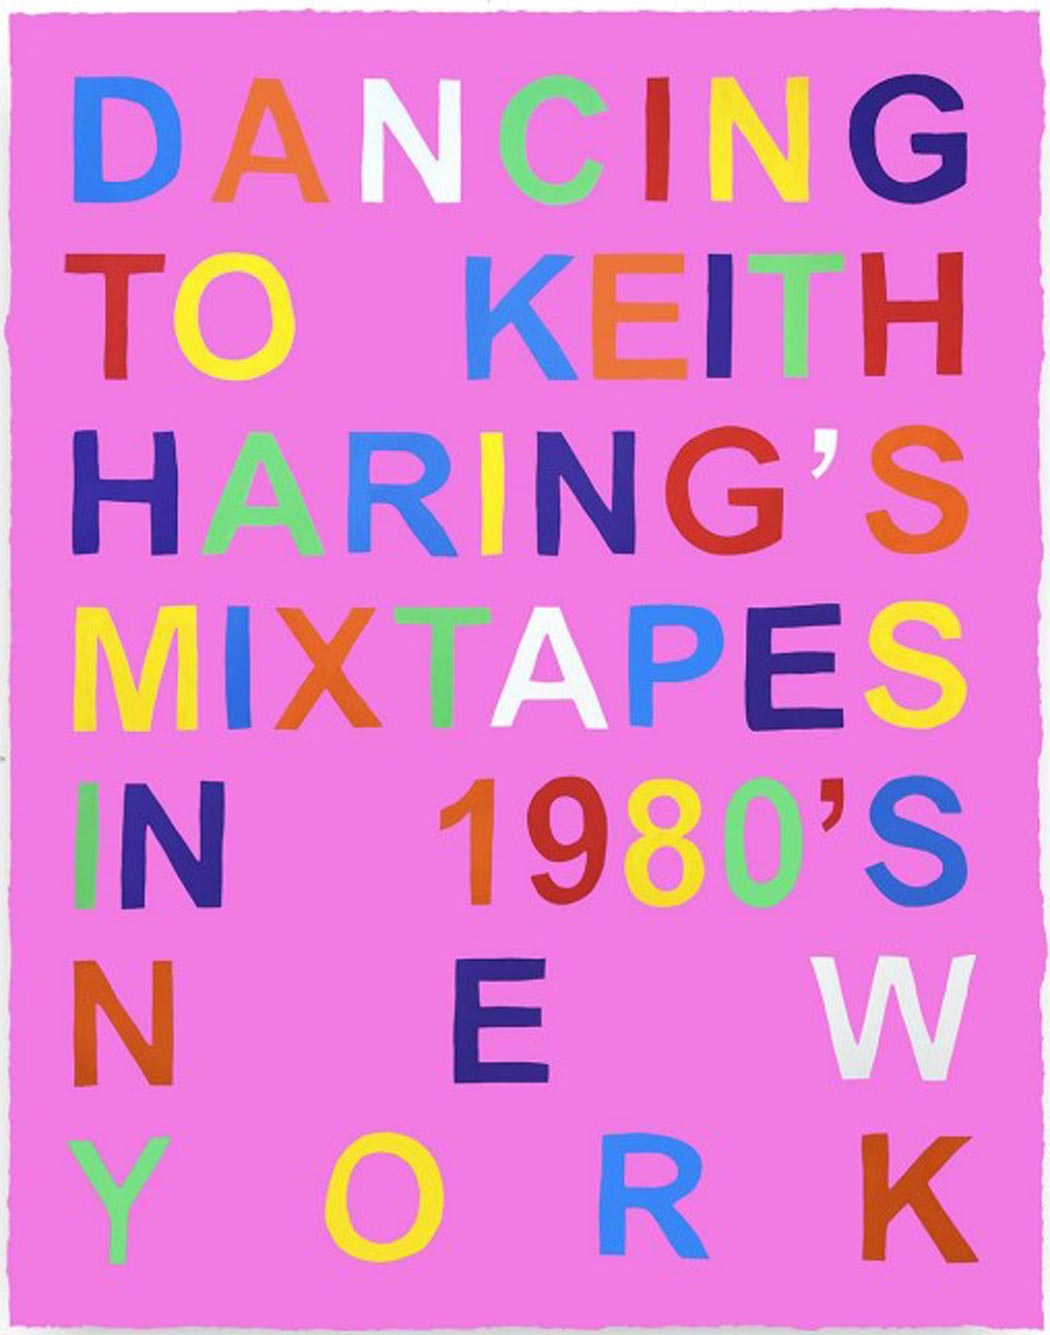 Dancing To Keith Haring’s Mixtapes In 1980’s New York - Pink Enlarged